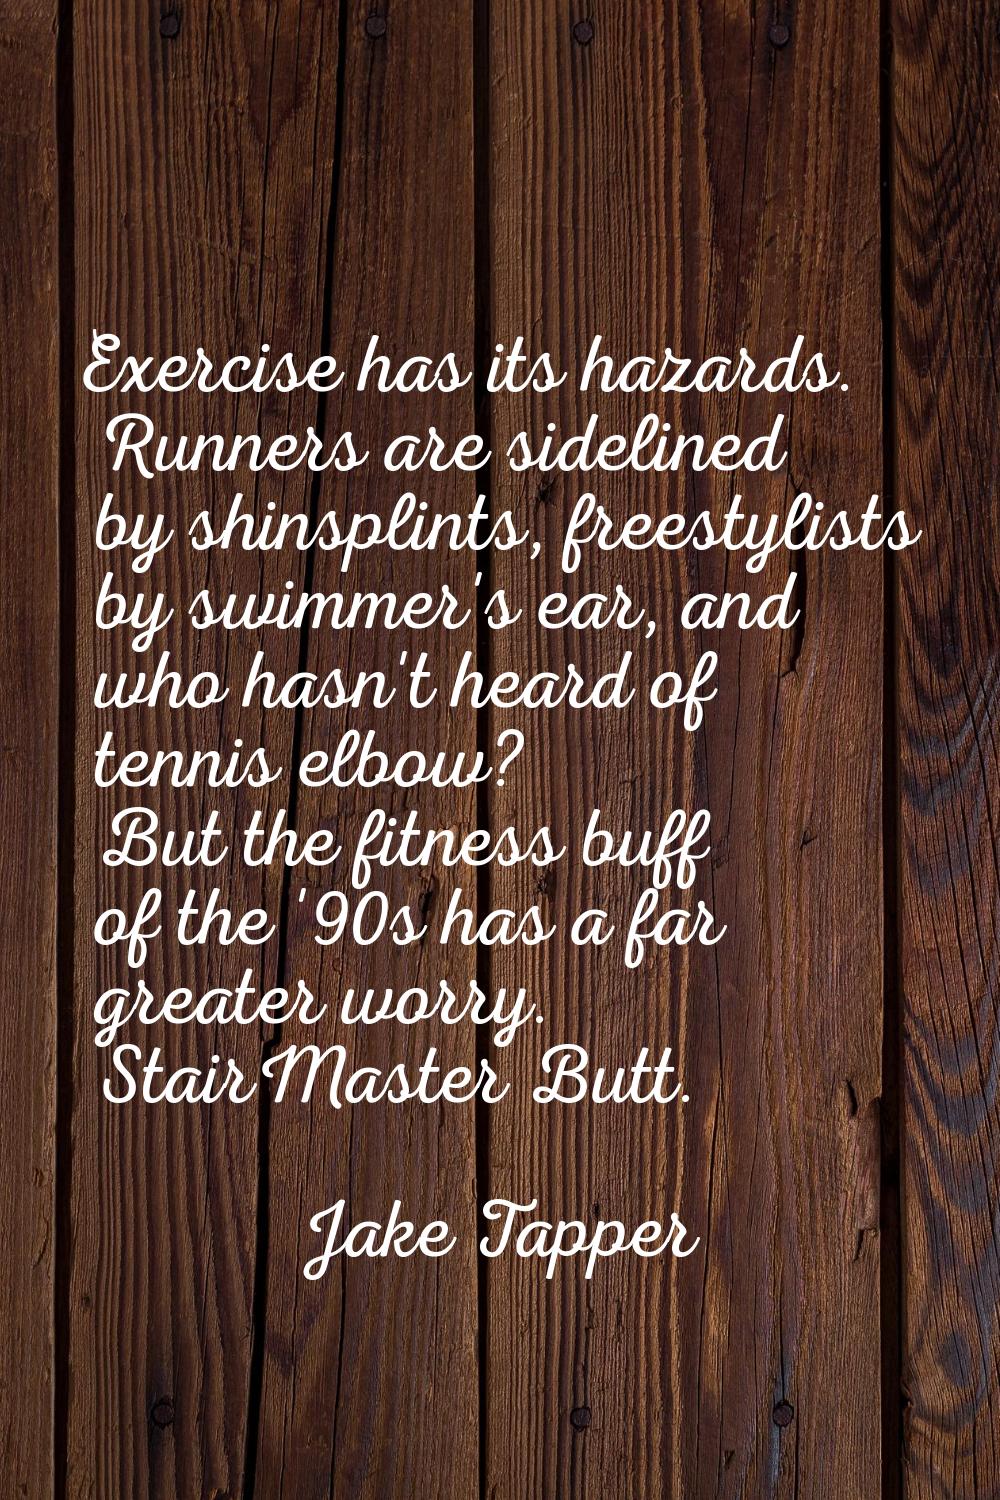 Exercise has its hazards. Runners are sidelined by shinsplints, freestylists by swimmer's ear, and 